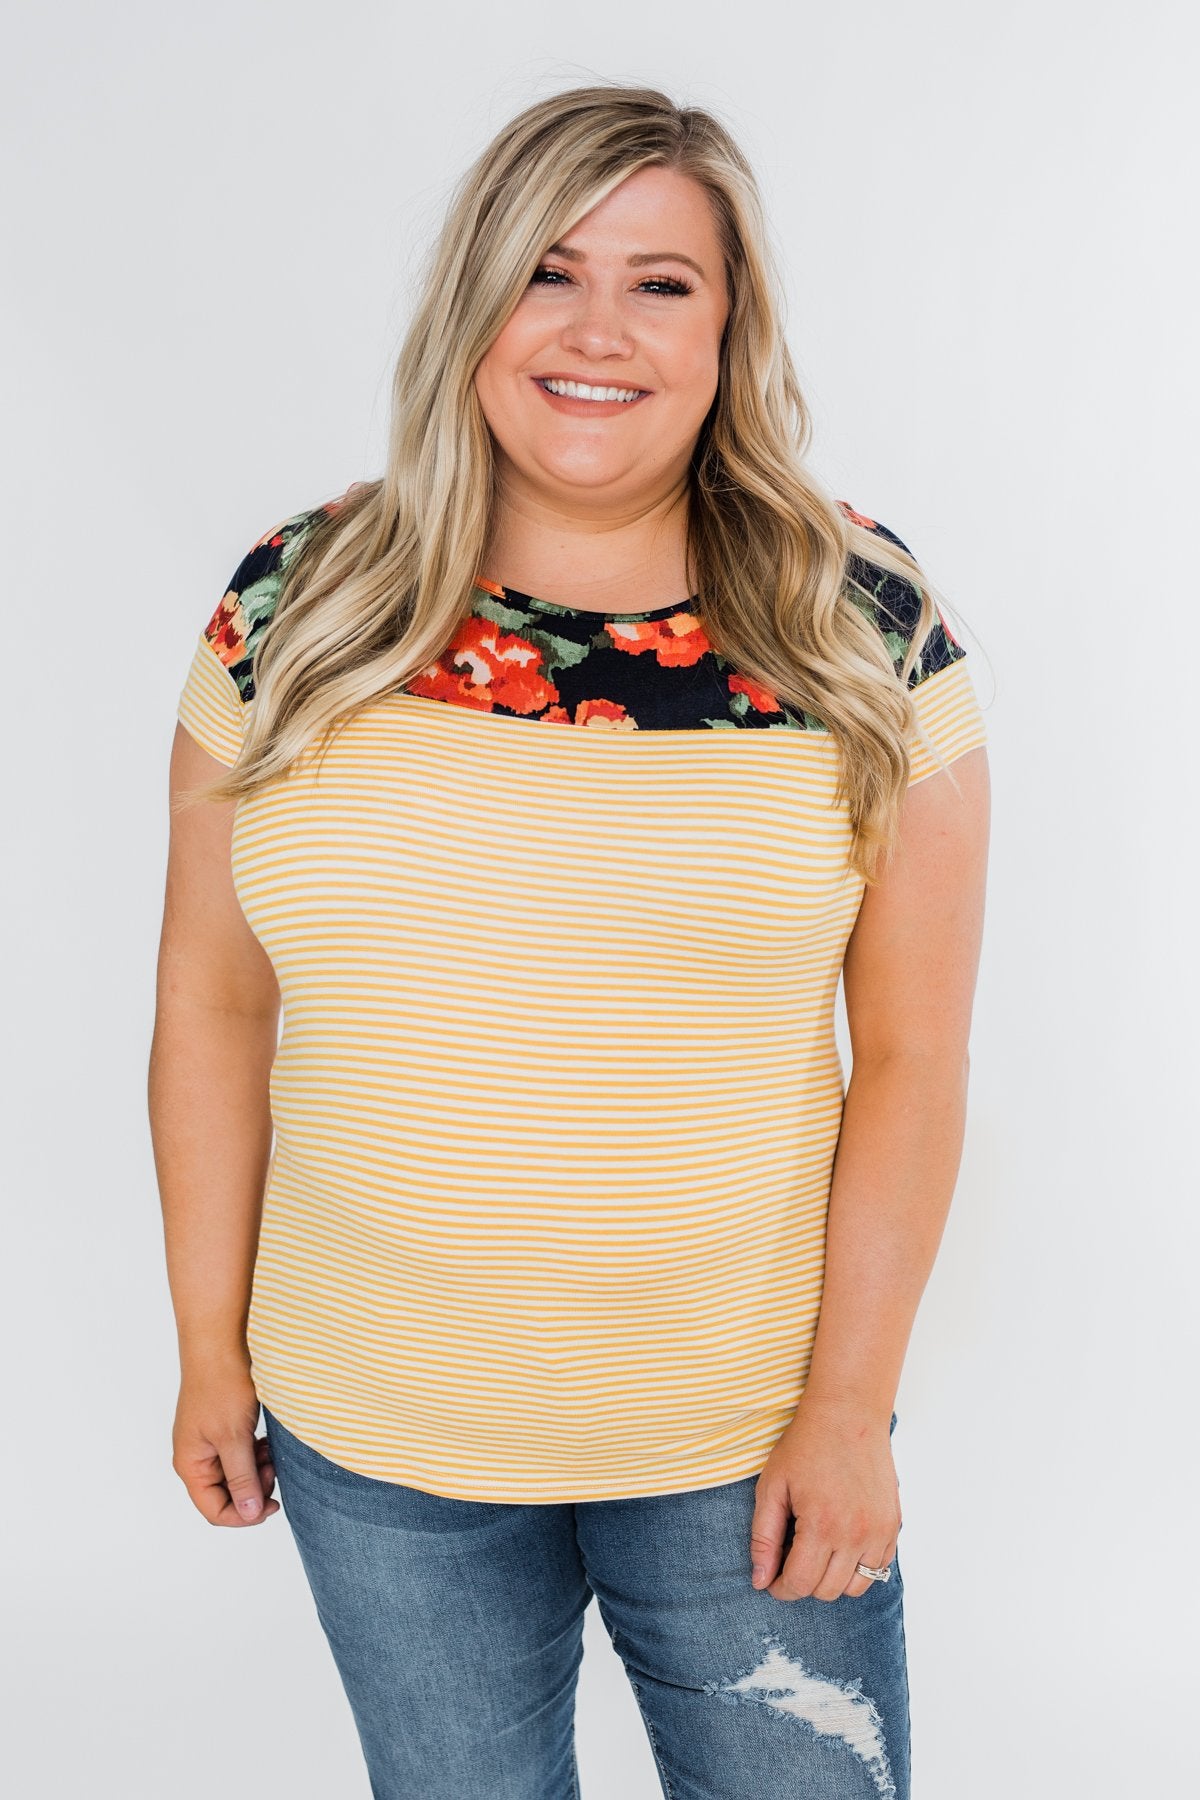 Floral Fever Short Sleeve Stripe and Floral Top - Yellow